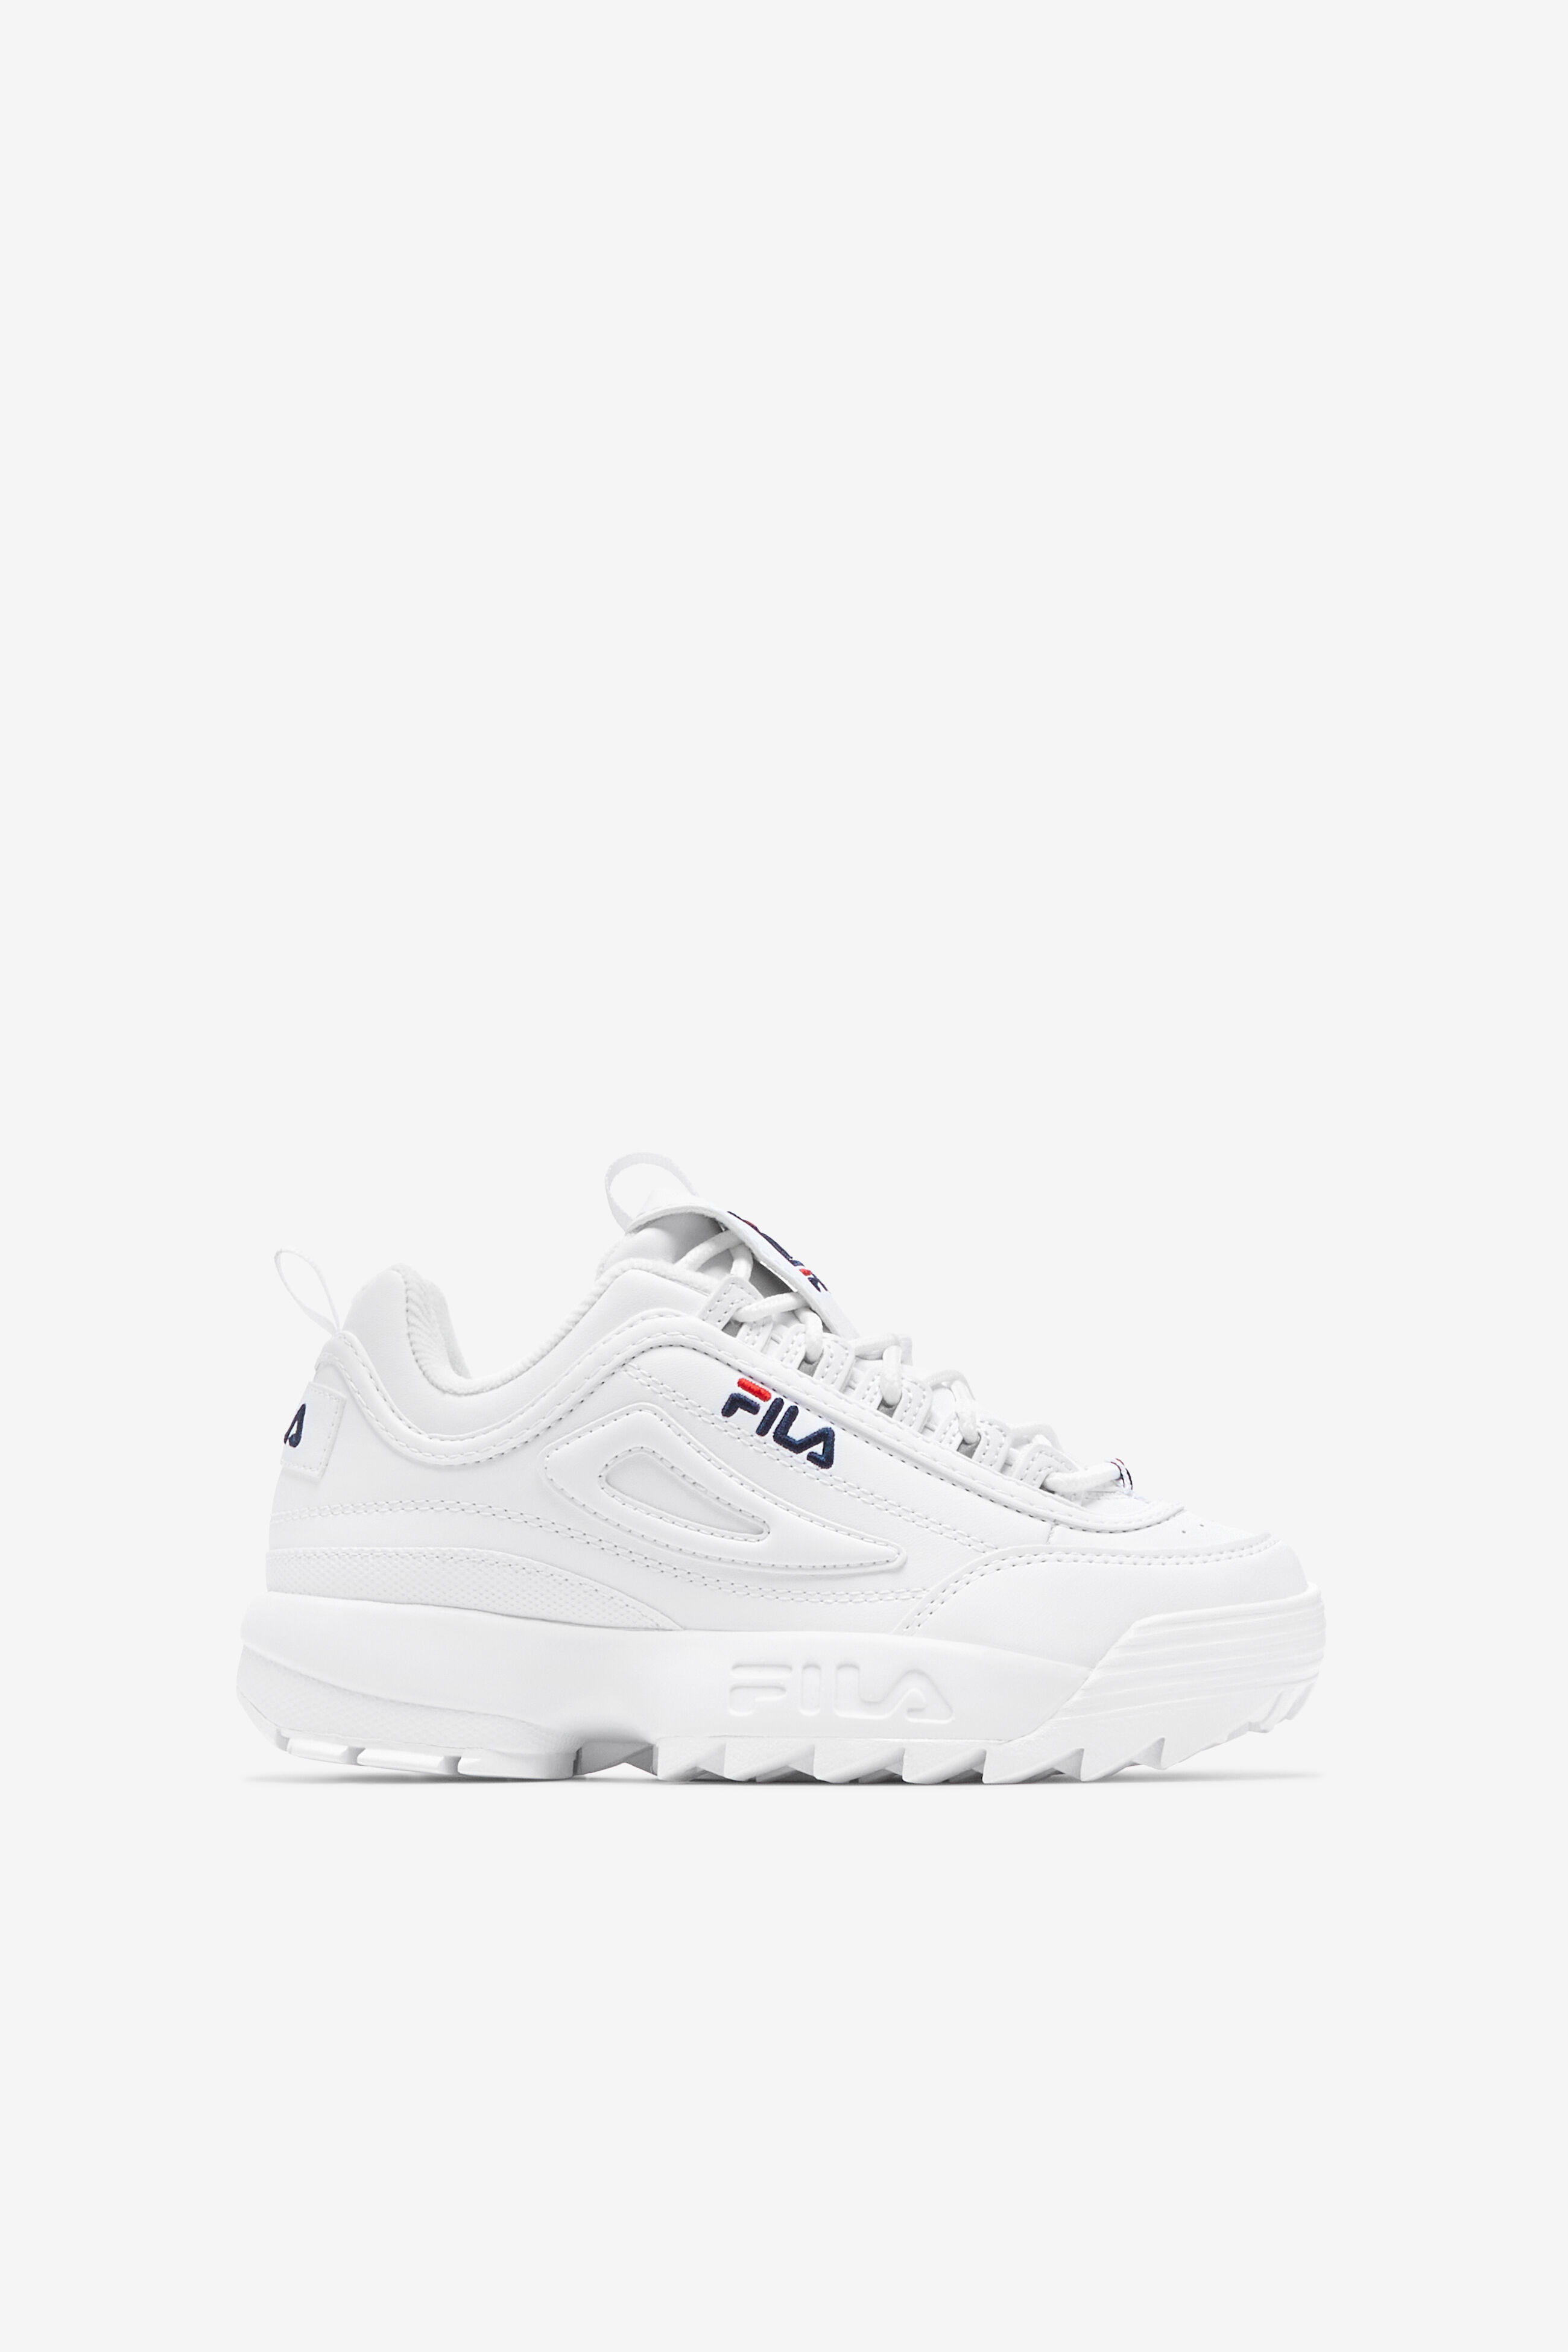 Fila Provenance Men's Lace Up Chunky Sole Sneakers In White Size 11.5 -  Walmart.com